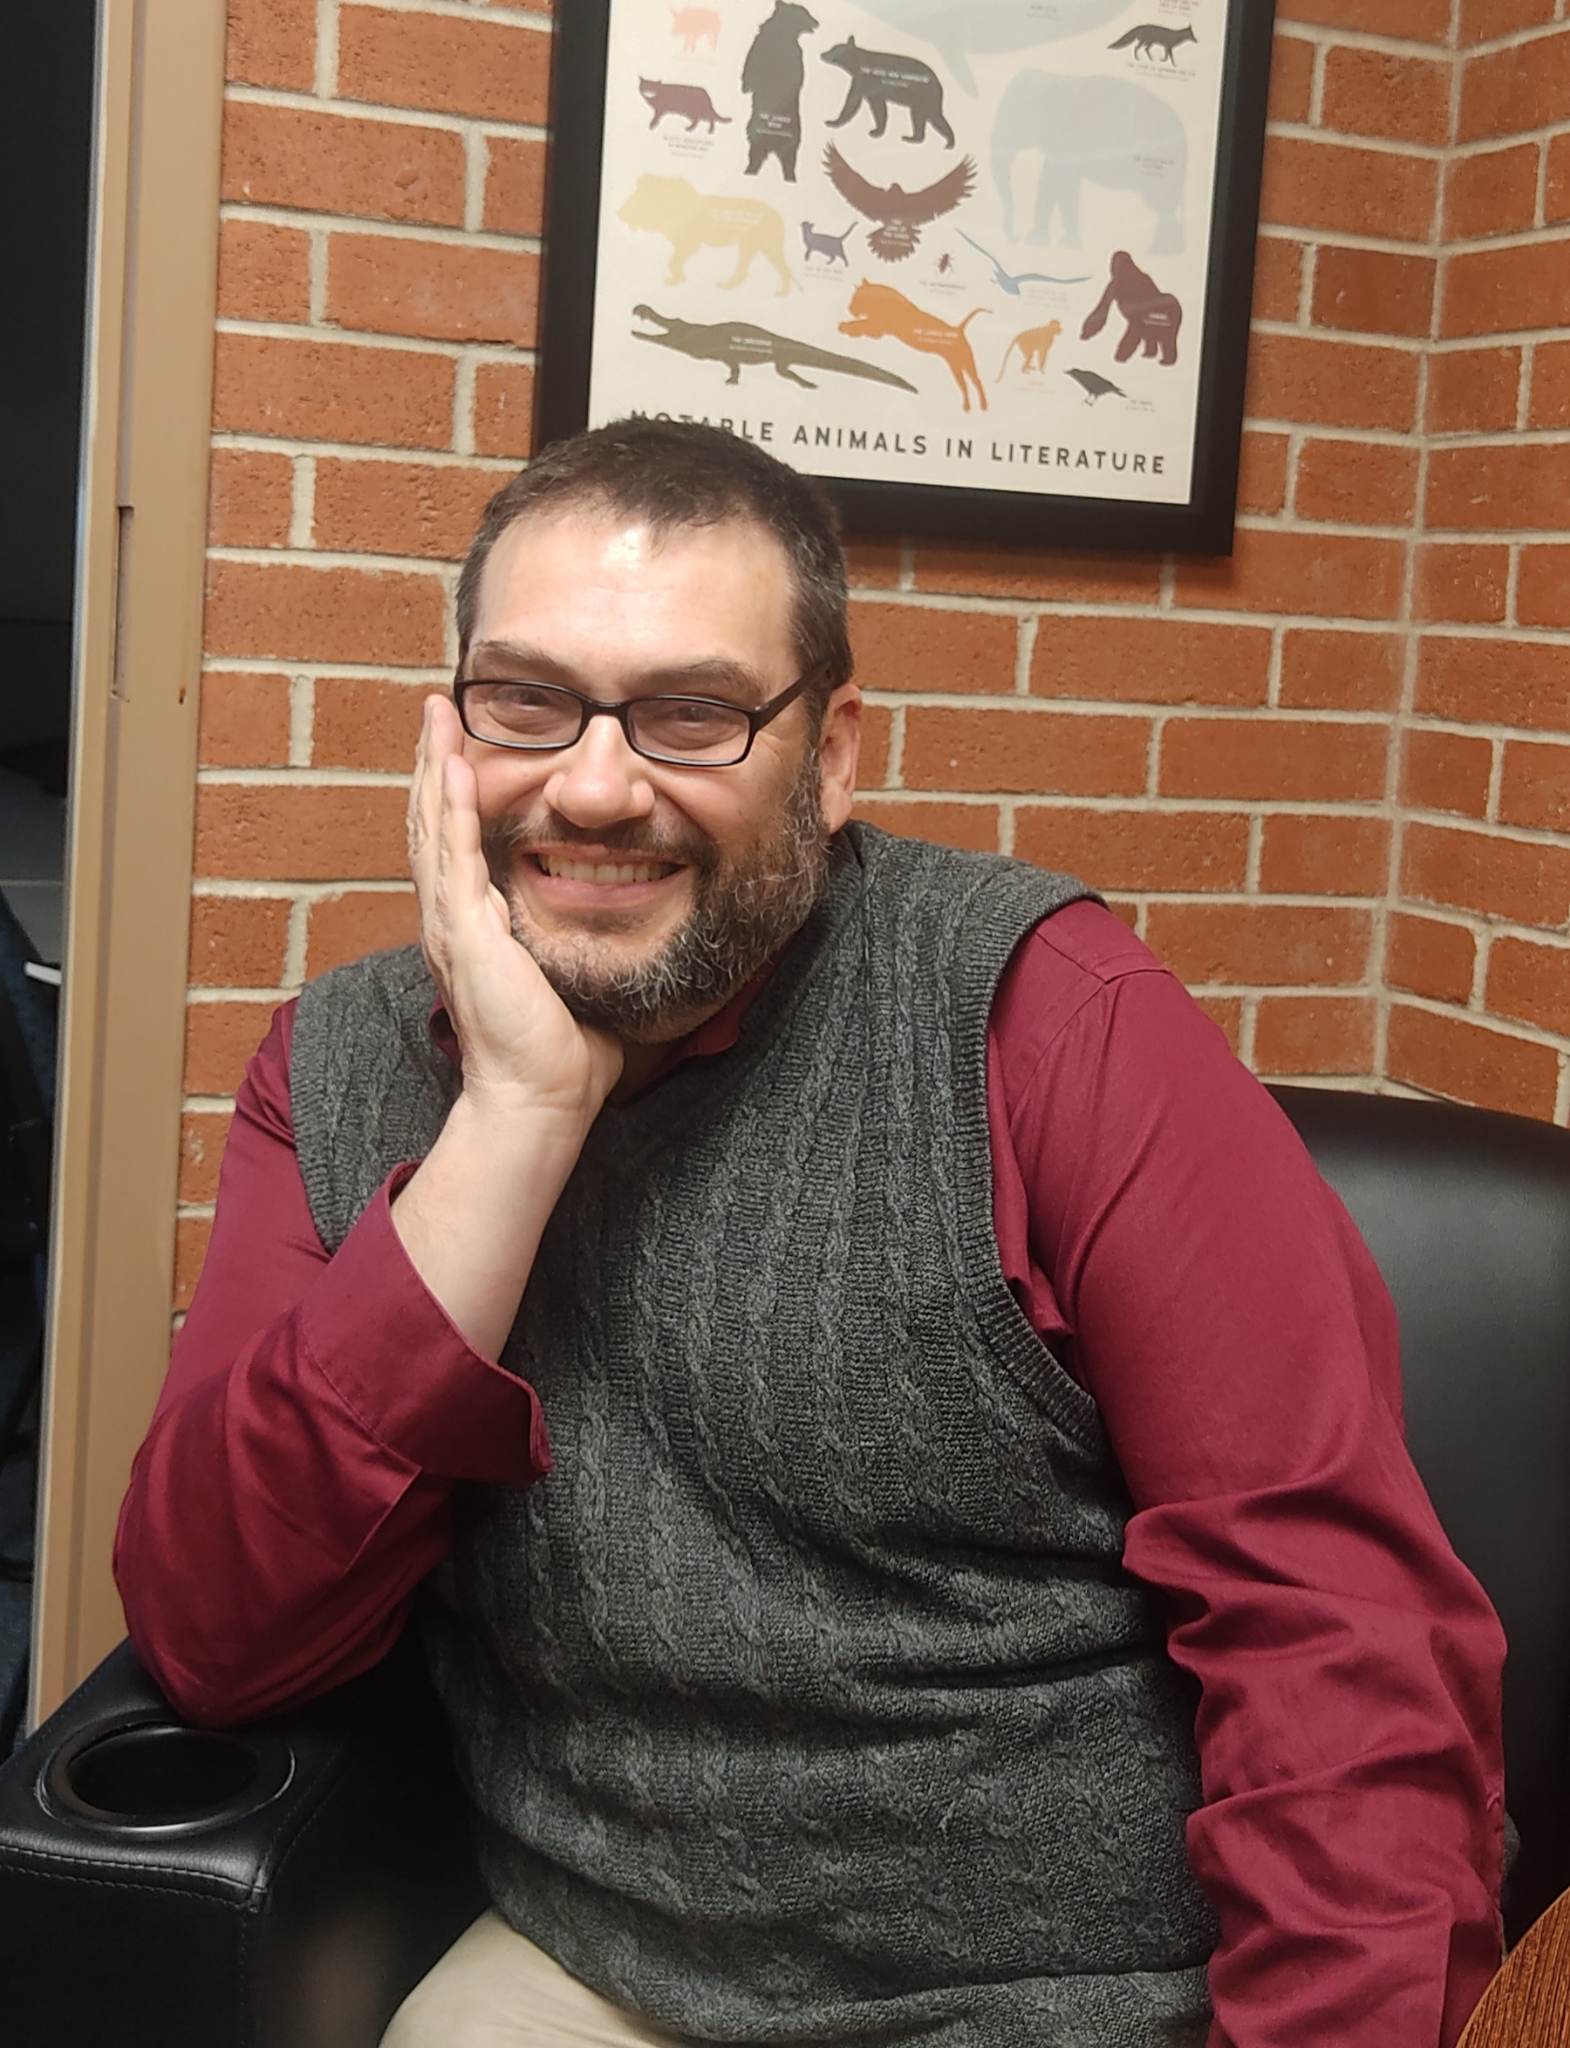 Dennis Etzel Jr., senior lecturer of English, implements innovative educational strategies that help students feel comfortable. He has motivated students to engage with writing and implement their ability to think strategically.